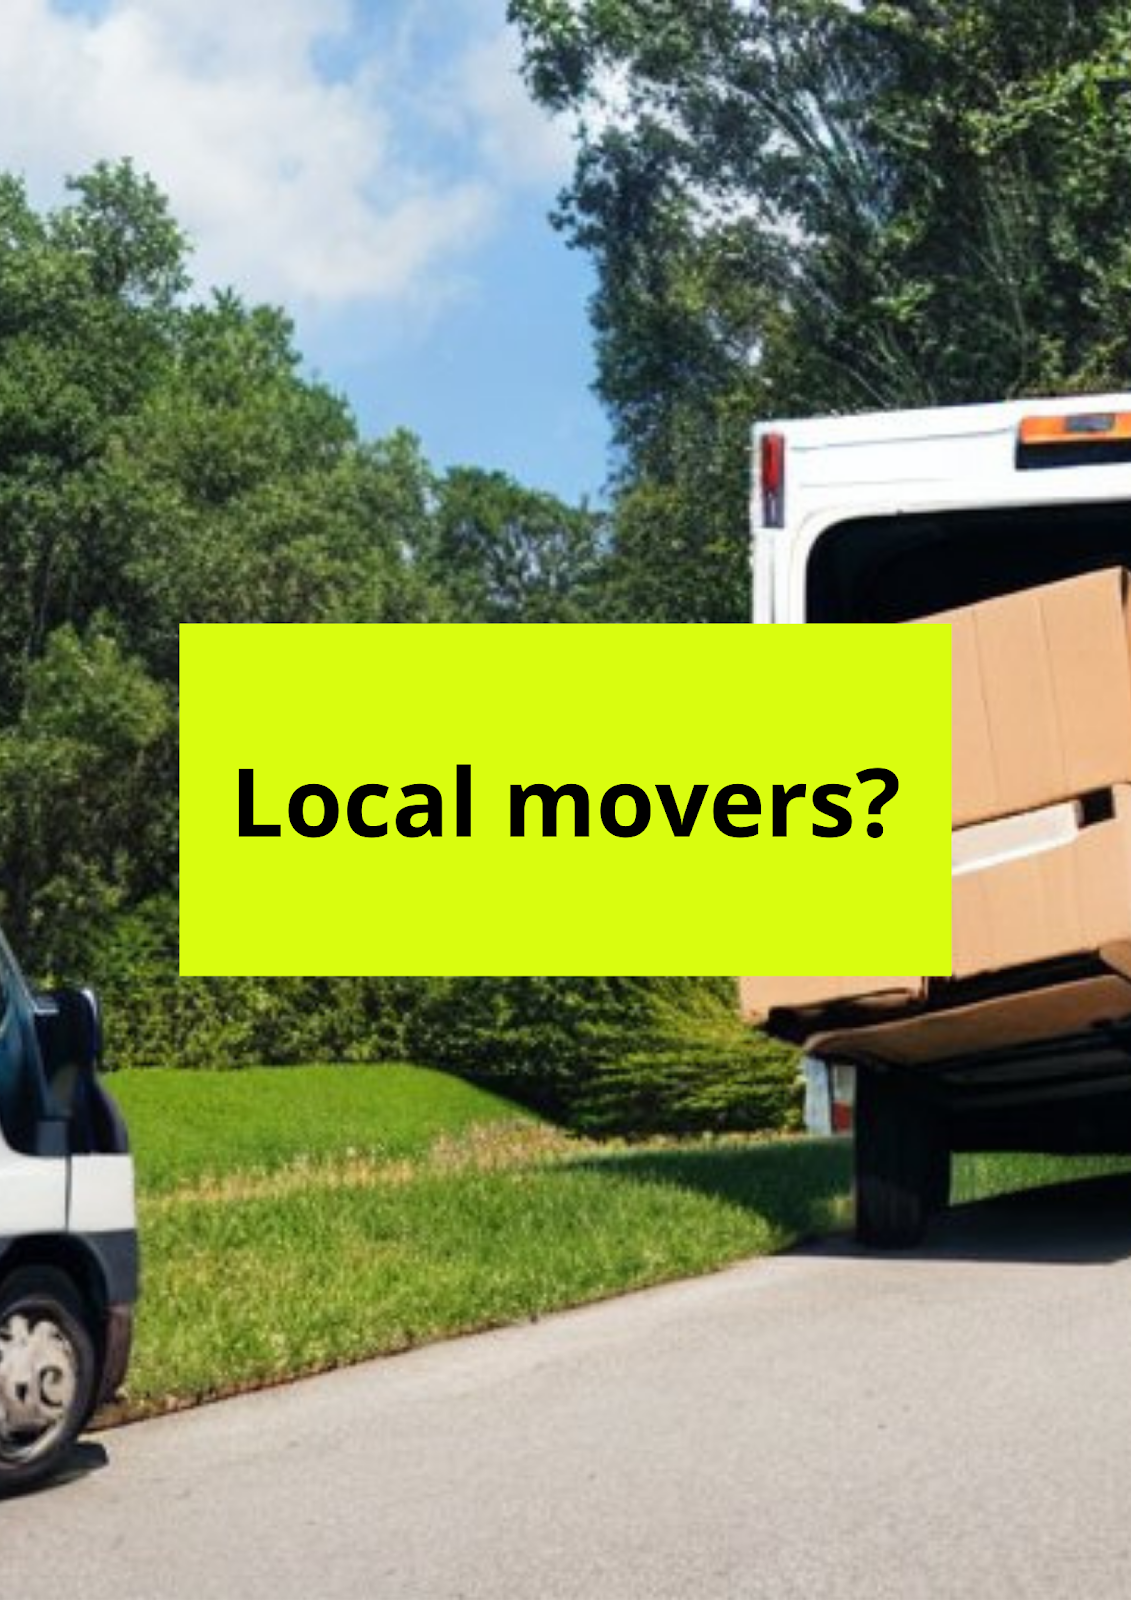 Local Moving Companies: The Ultimate Guide for California